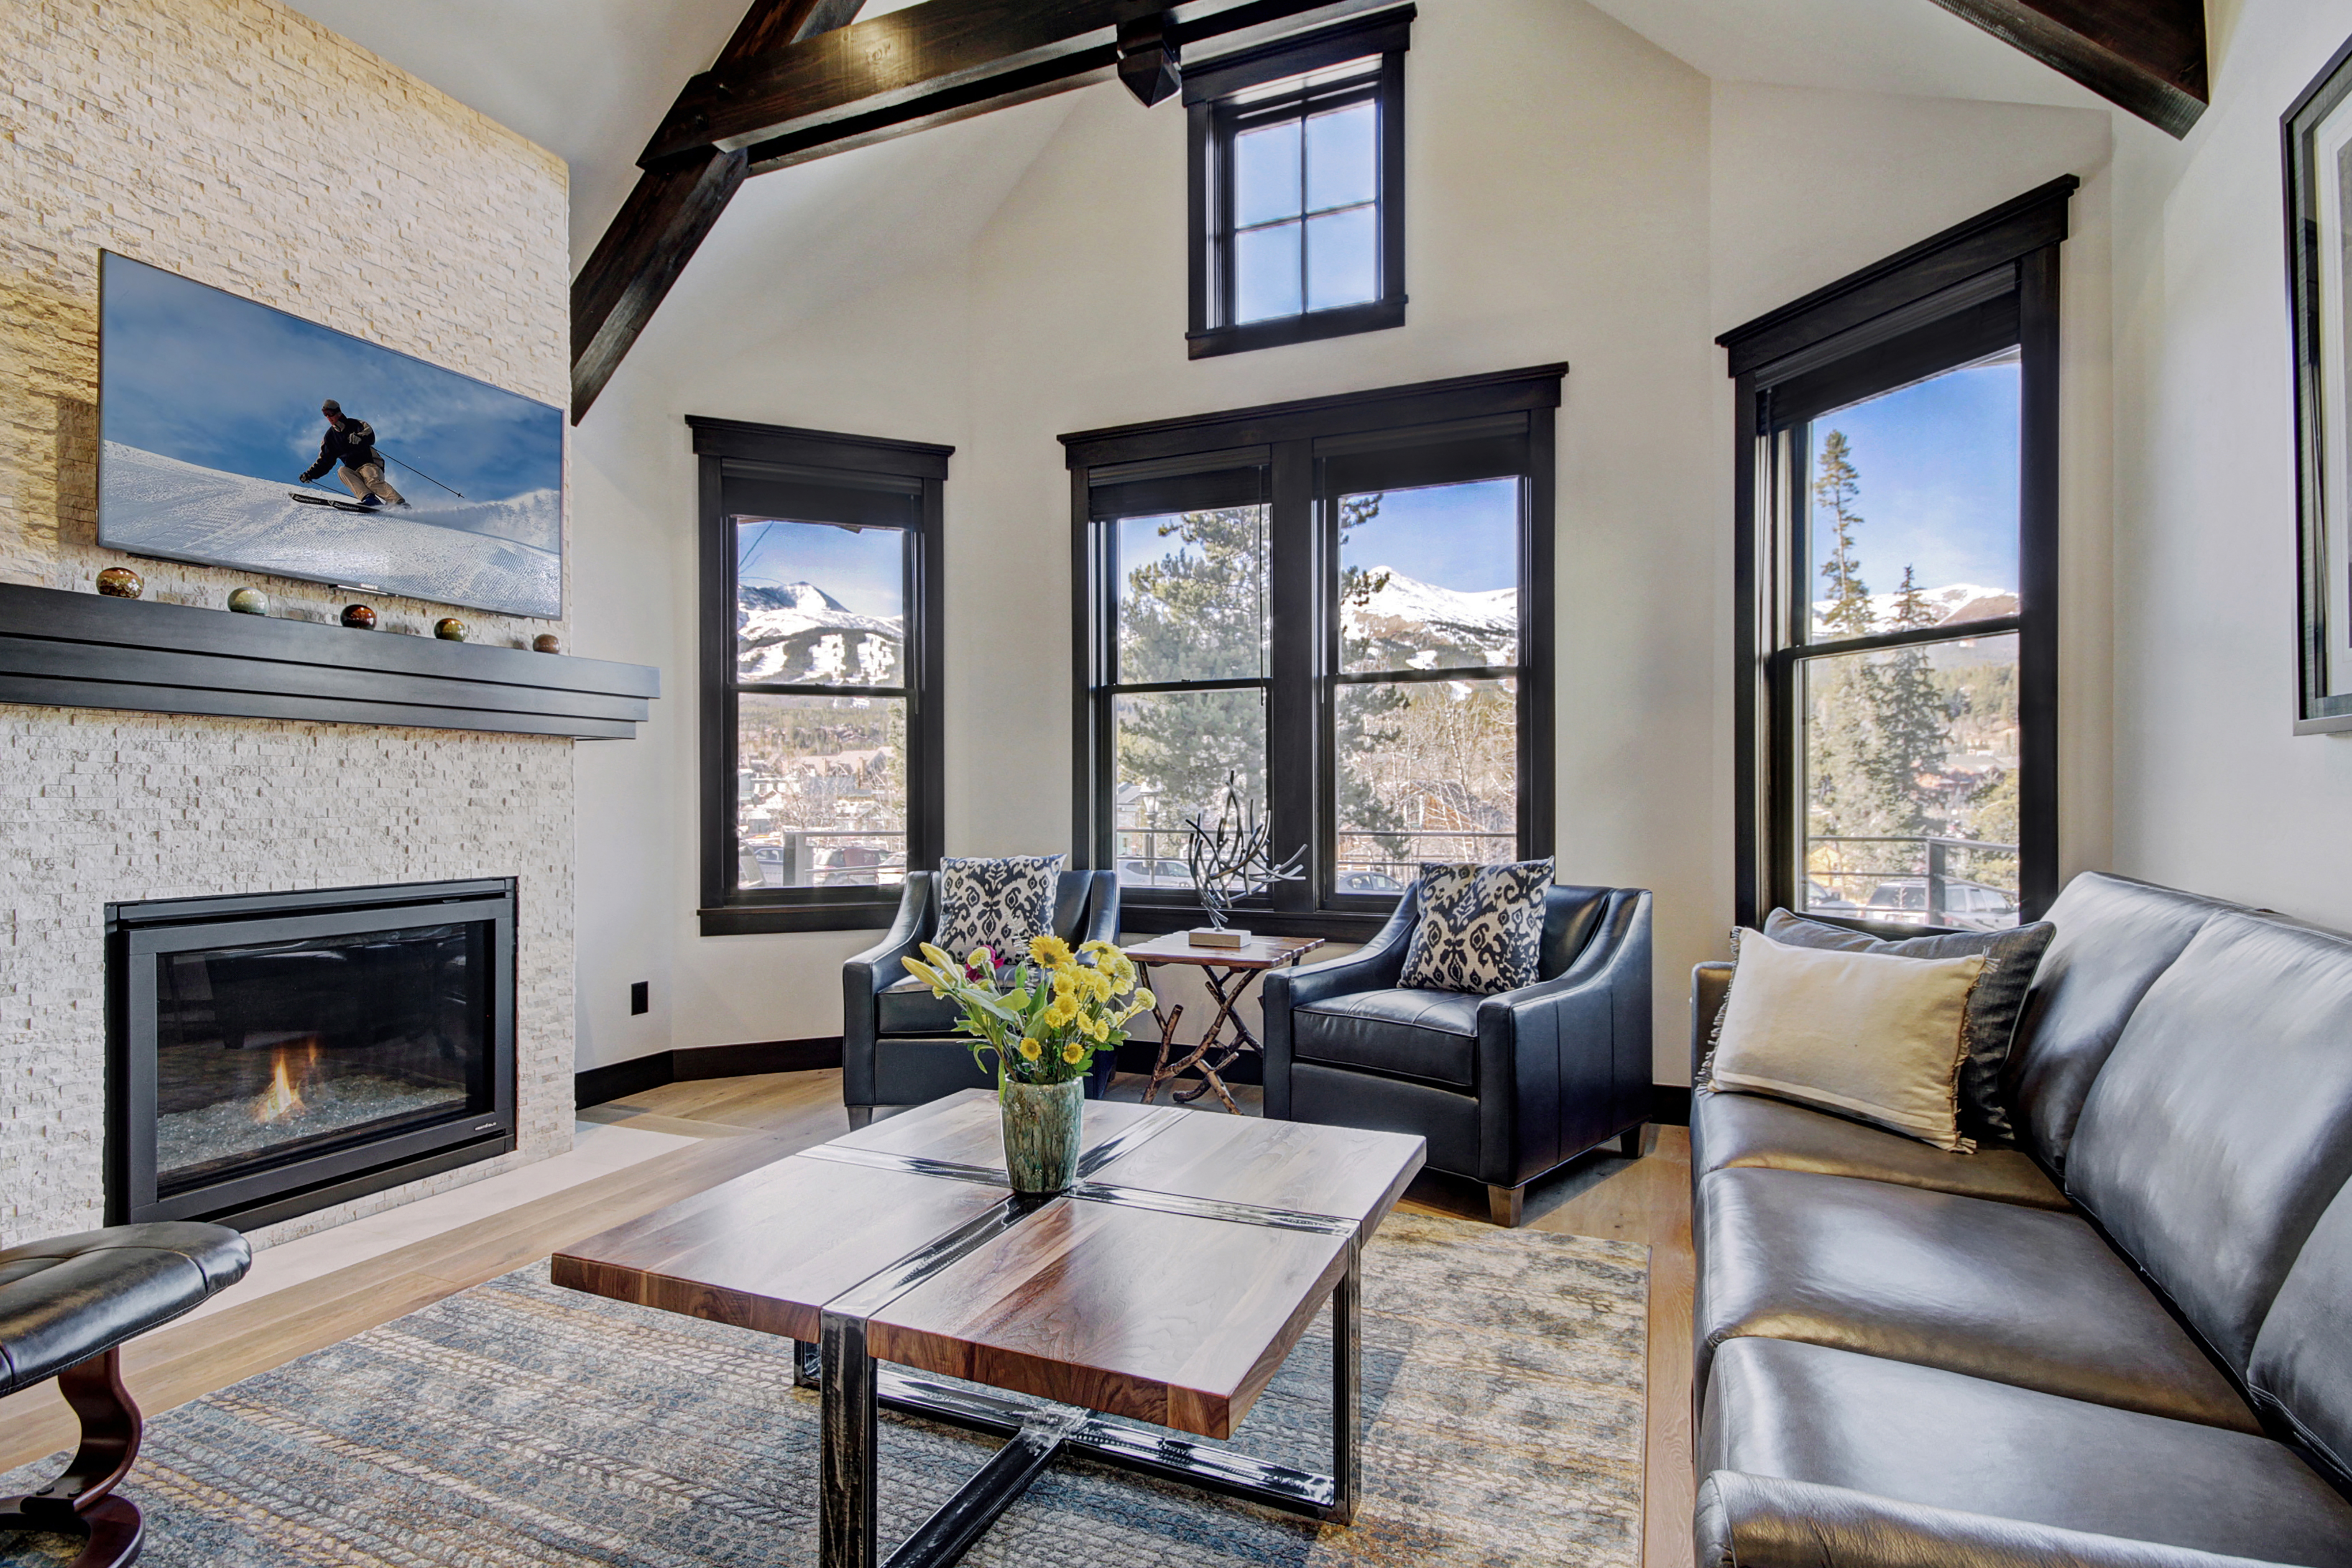 The vaulted ceilings add to grandeur to the spacious living room - The Bogart House Breckenridge Vacation Rental